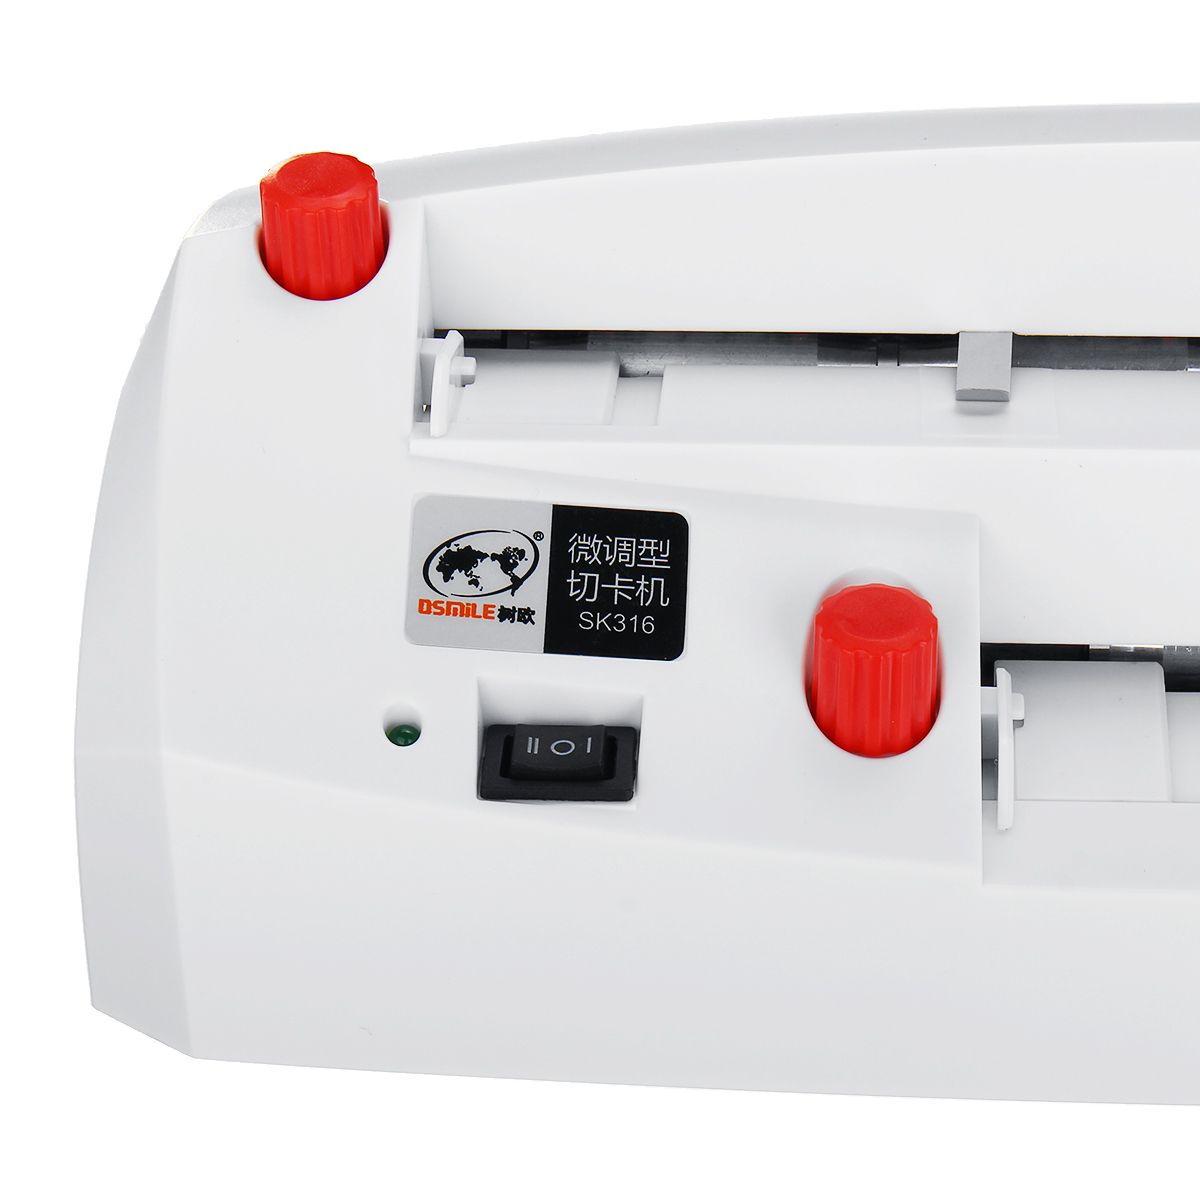 Automatic-Business-Electric-Card-Cutter-Name-Card-Slitter-Cutter-A4-Size-For-Home-Office-1522122